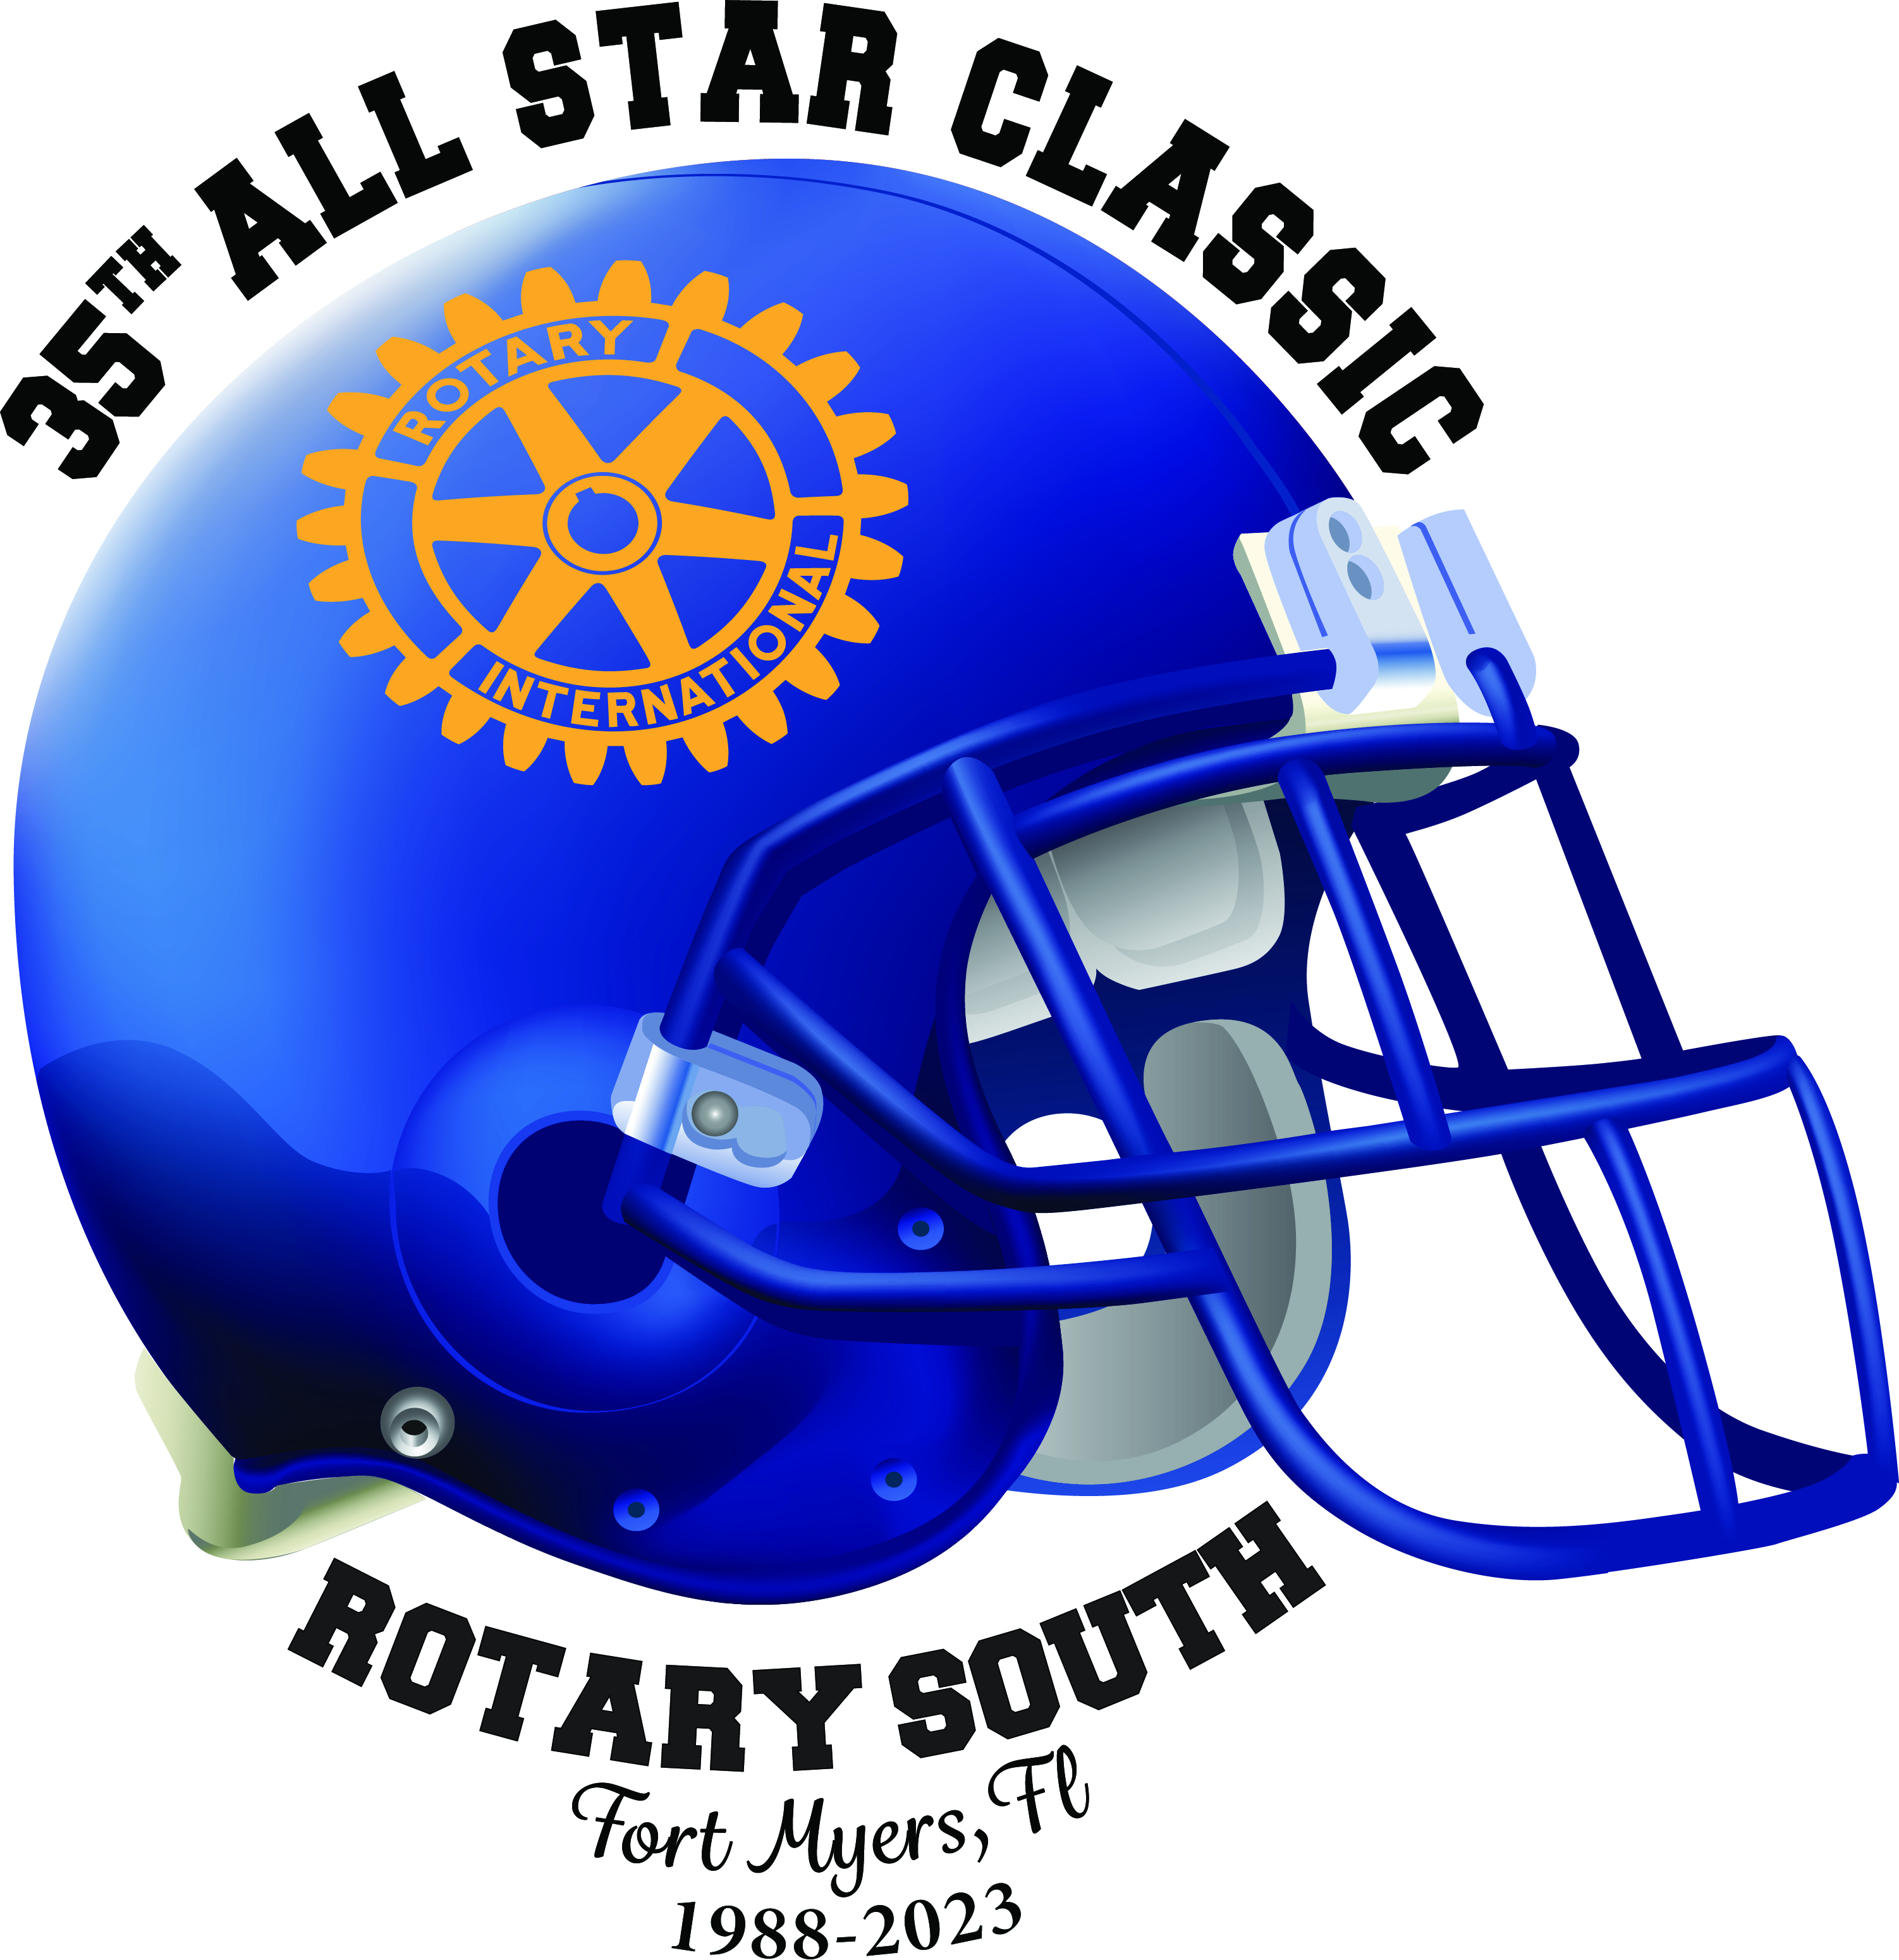 New Dates for This Year’s Rotary South All-Star Classic